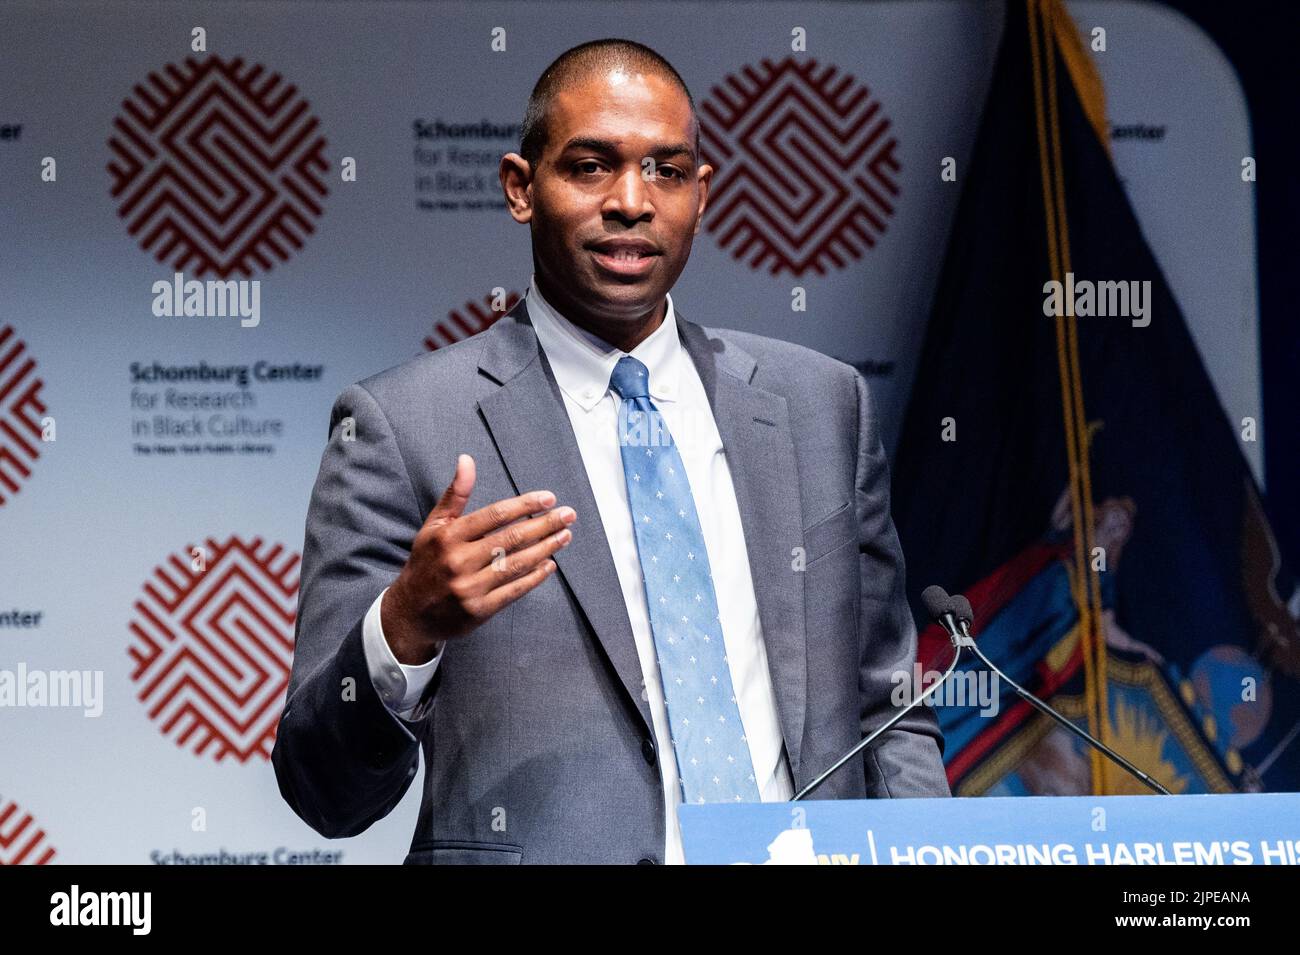 New York City, United States. 17th Aug, 2022. New York Lieutenant Governor Antonio Delgado (D) speaking at an event where a grant of eight million dollars was announced to renovate the Schomburg Center for Research in Black Culture. (Photo by Michael Brochstein/Sipa USA) Credit: Sipa USA/Alamy Live News Stock Photo